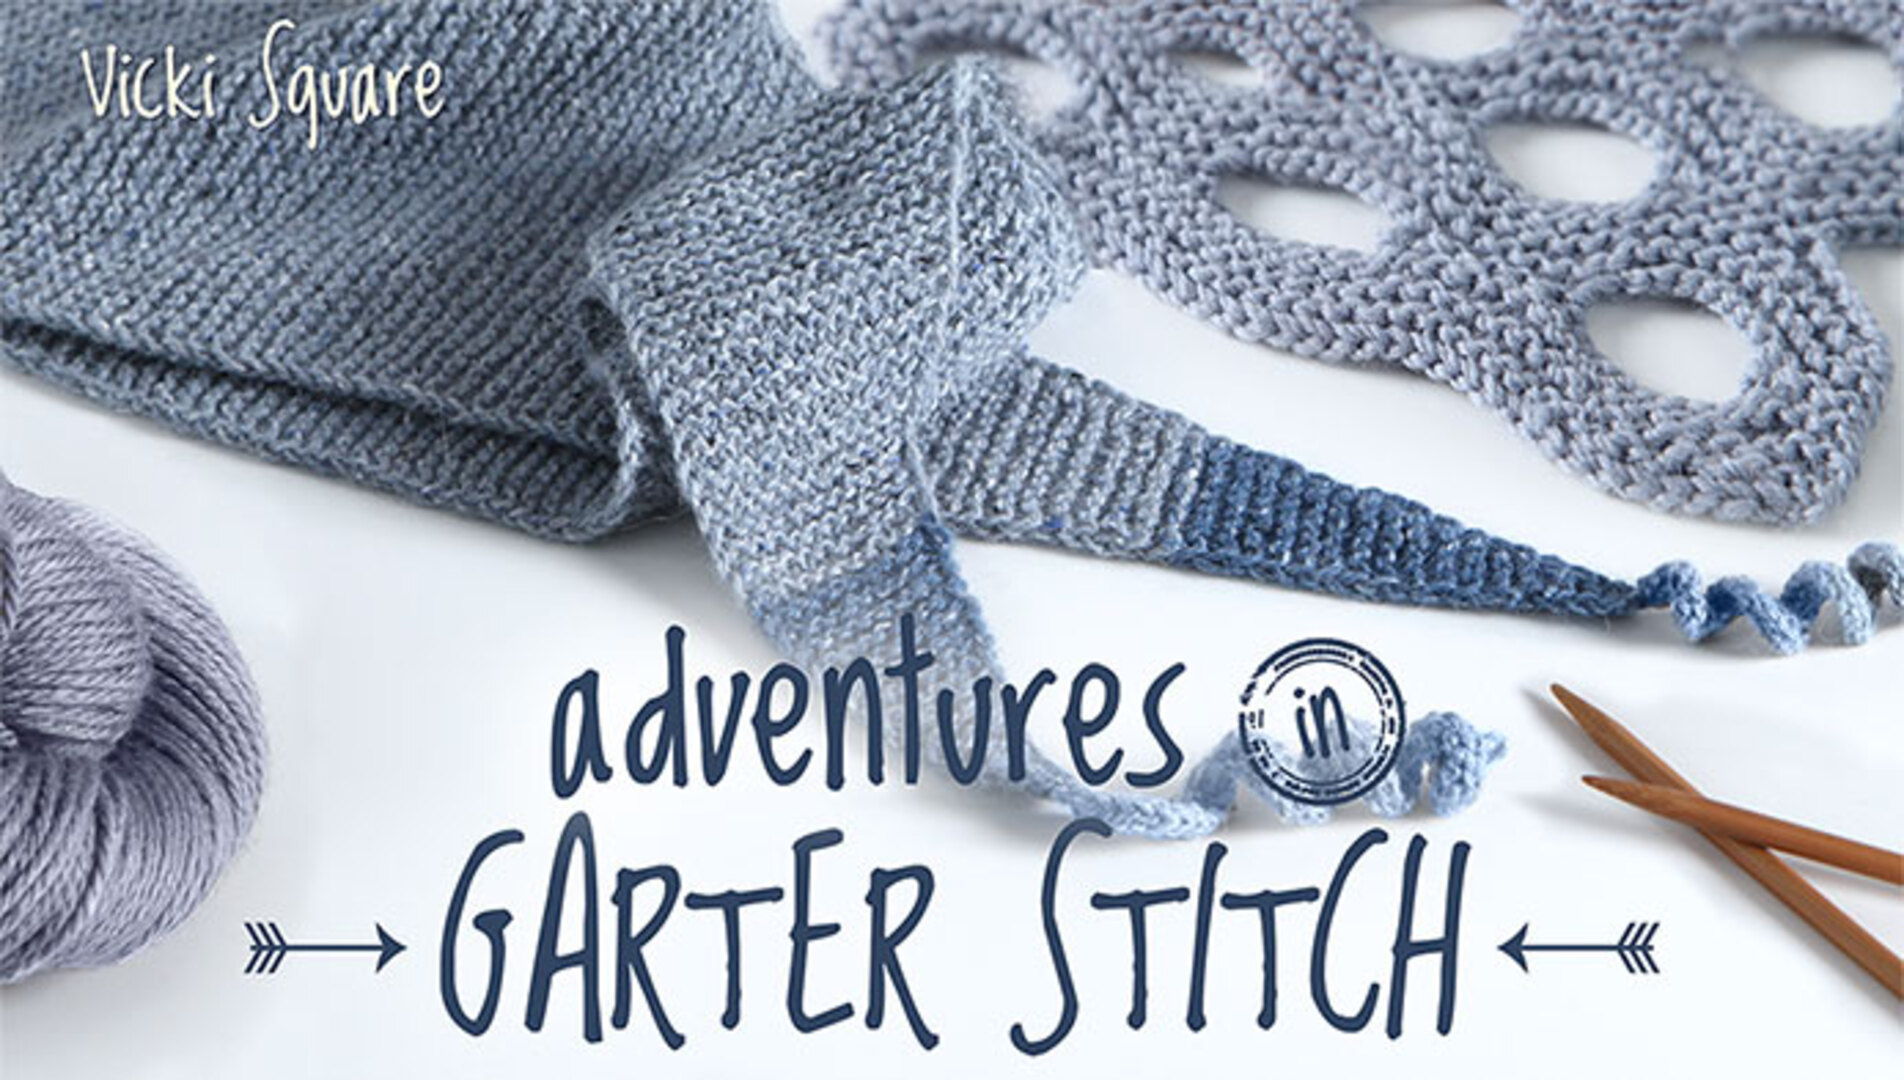 Save Our Stitches: Fixing Lace Knitting Mistakes